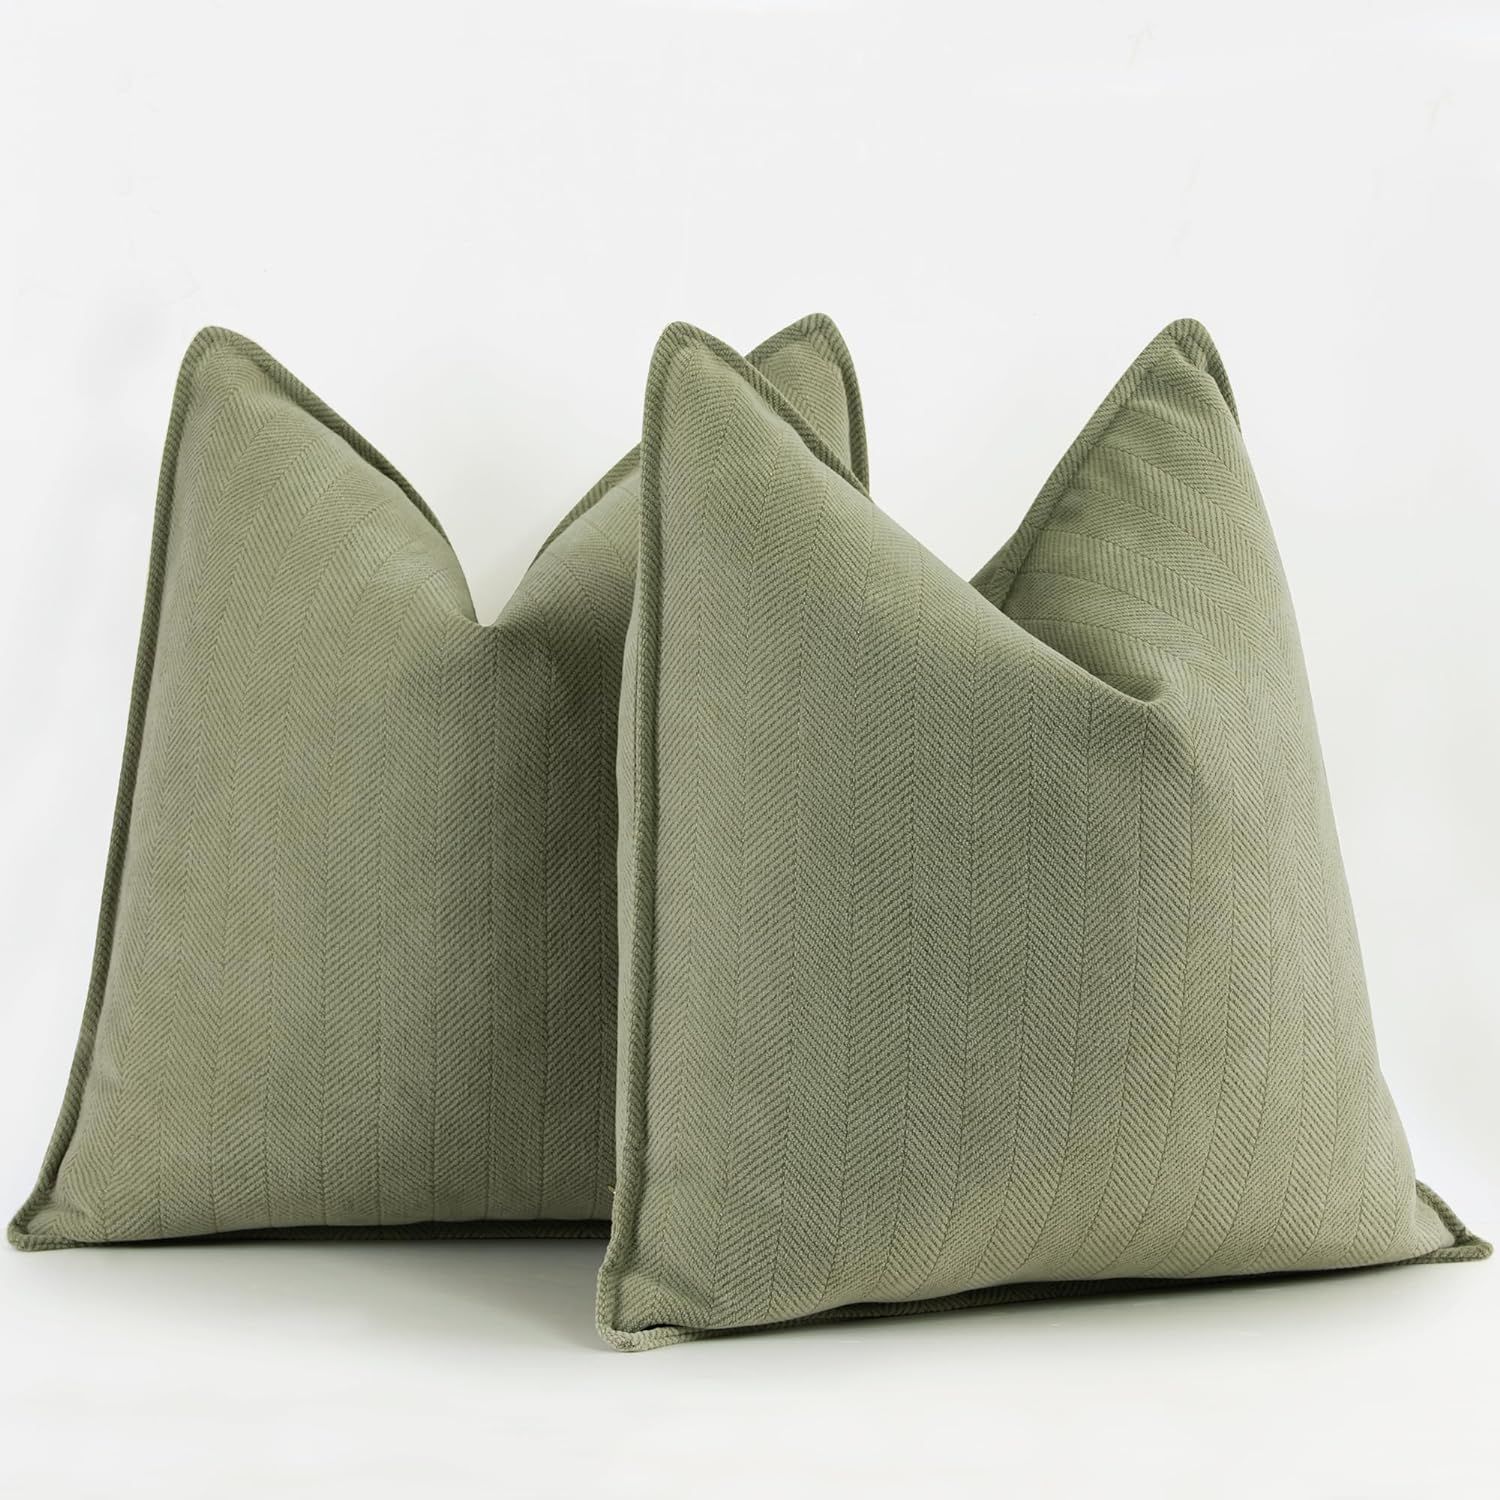 ZWJD Sage Green Pillow Covers 18x18 Set of 2 Chenille Pillow Covers with Elegant Design Soft and ... | Amazon (US)